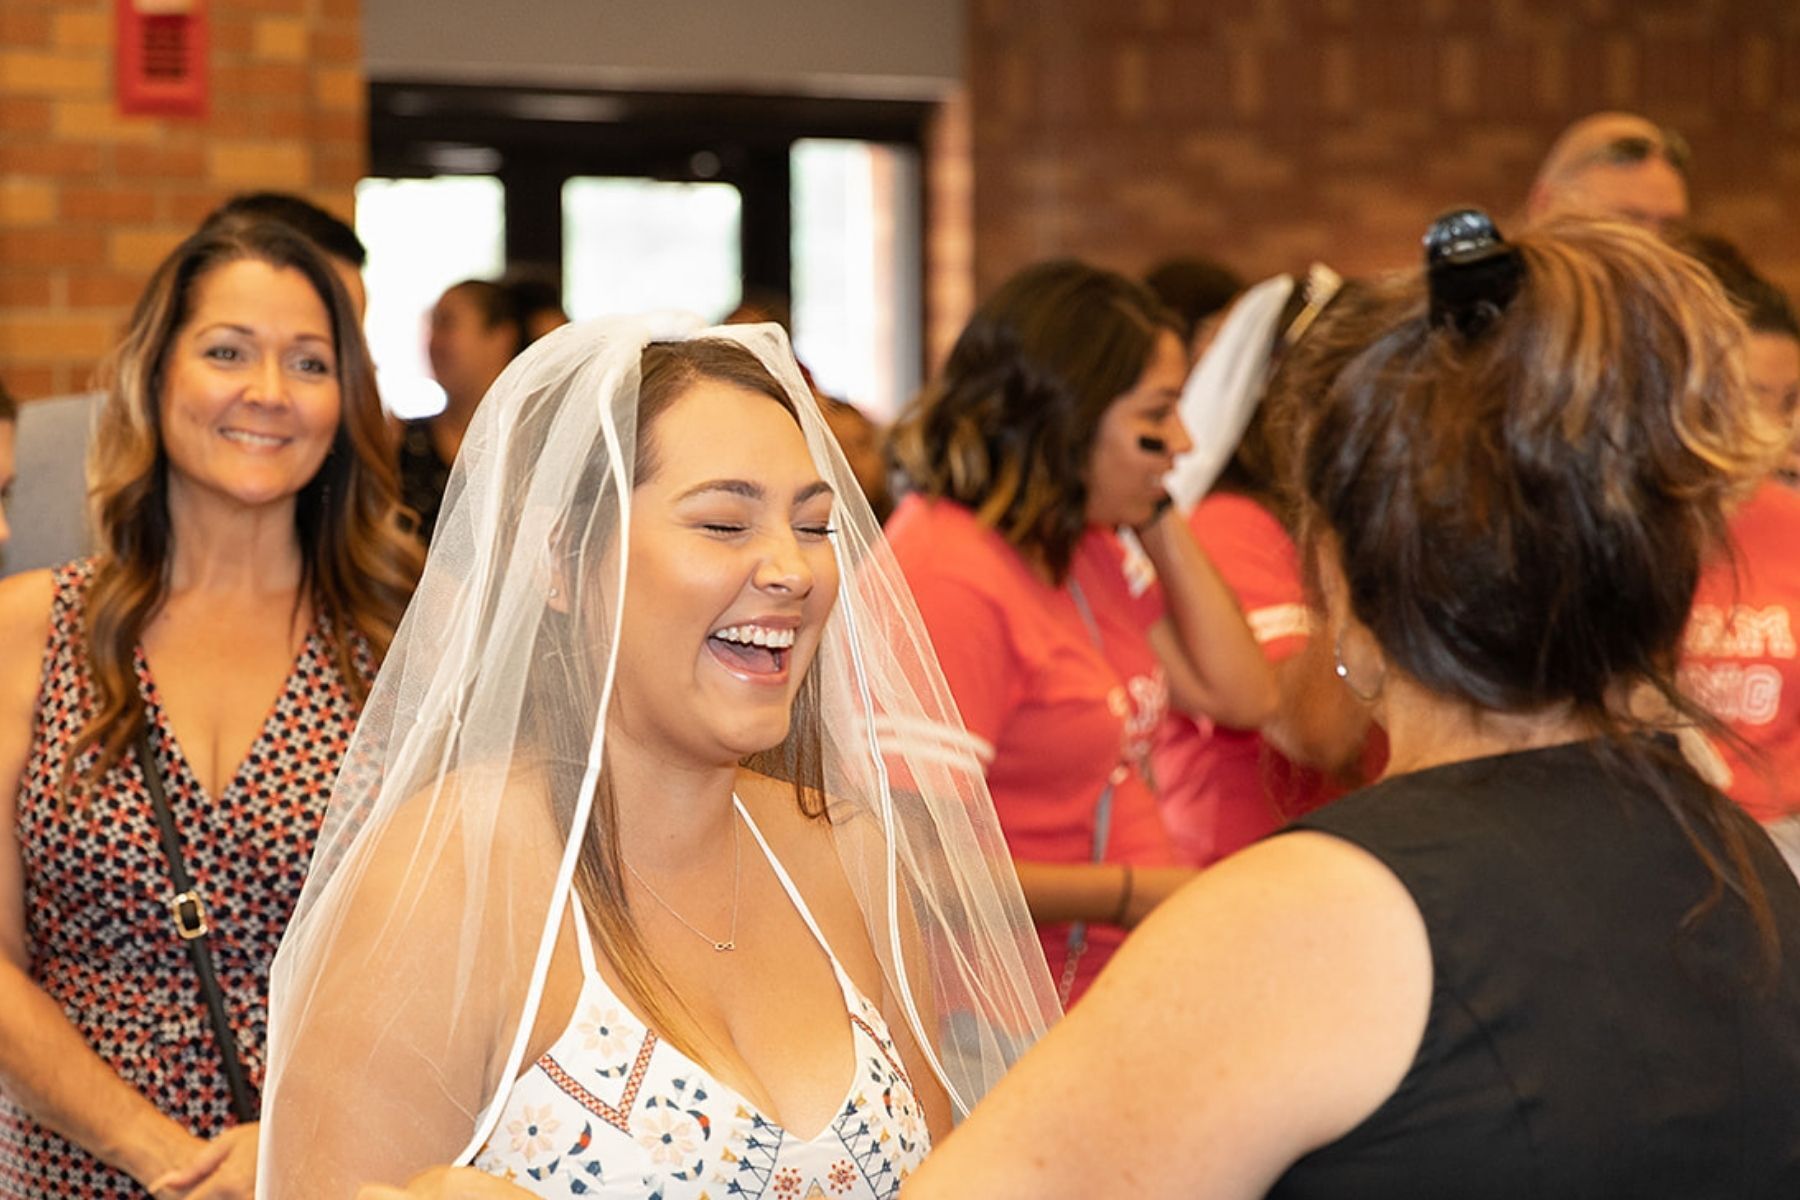 bride in line at modesto bridal show with wedding veil on smiling